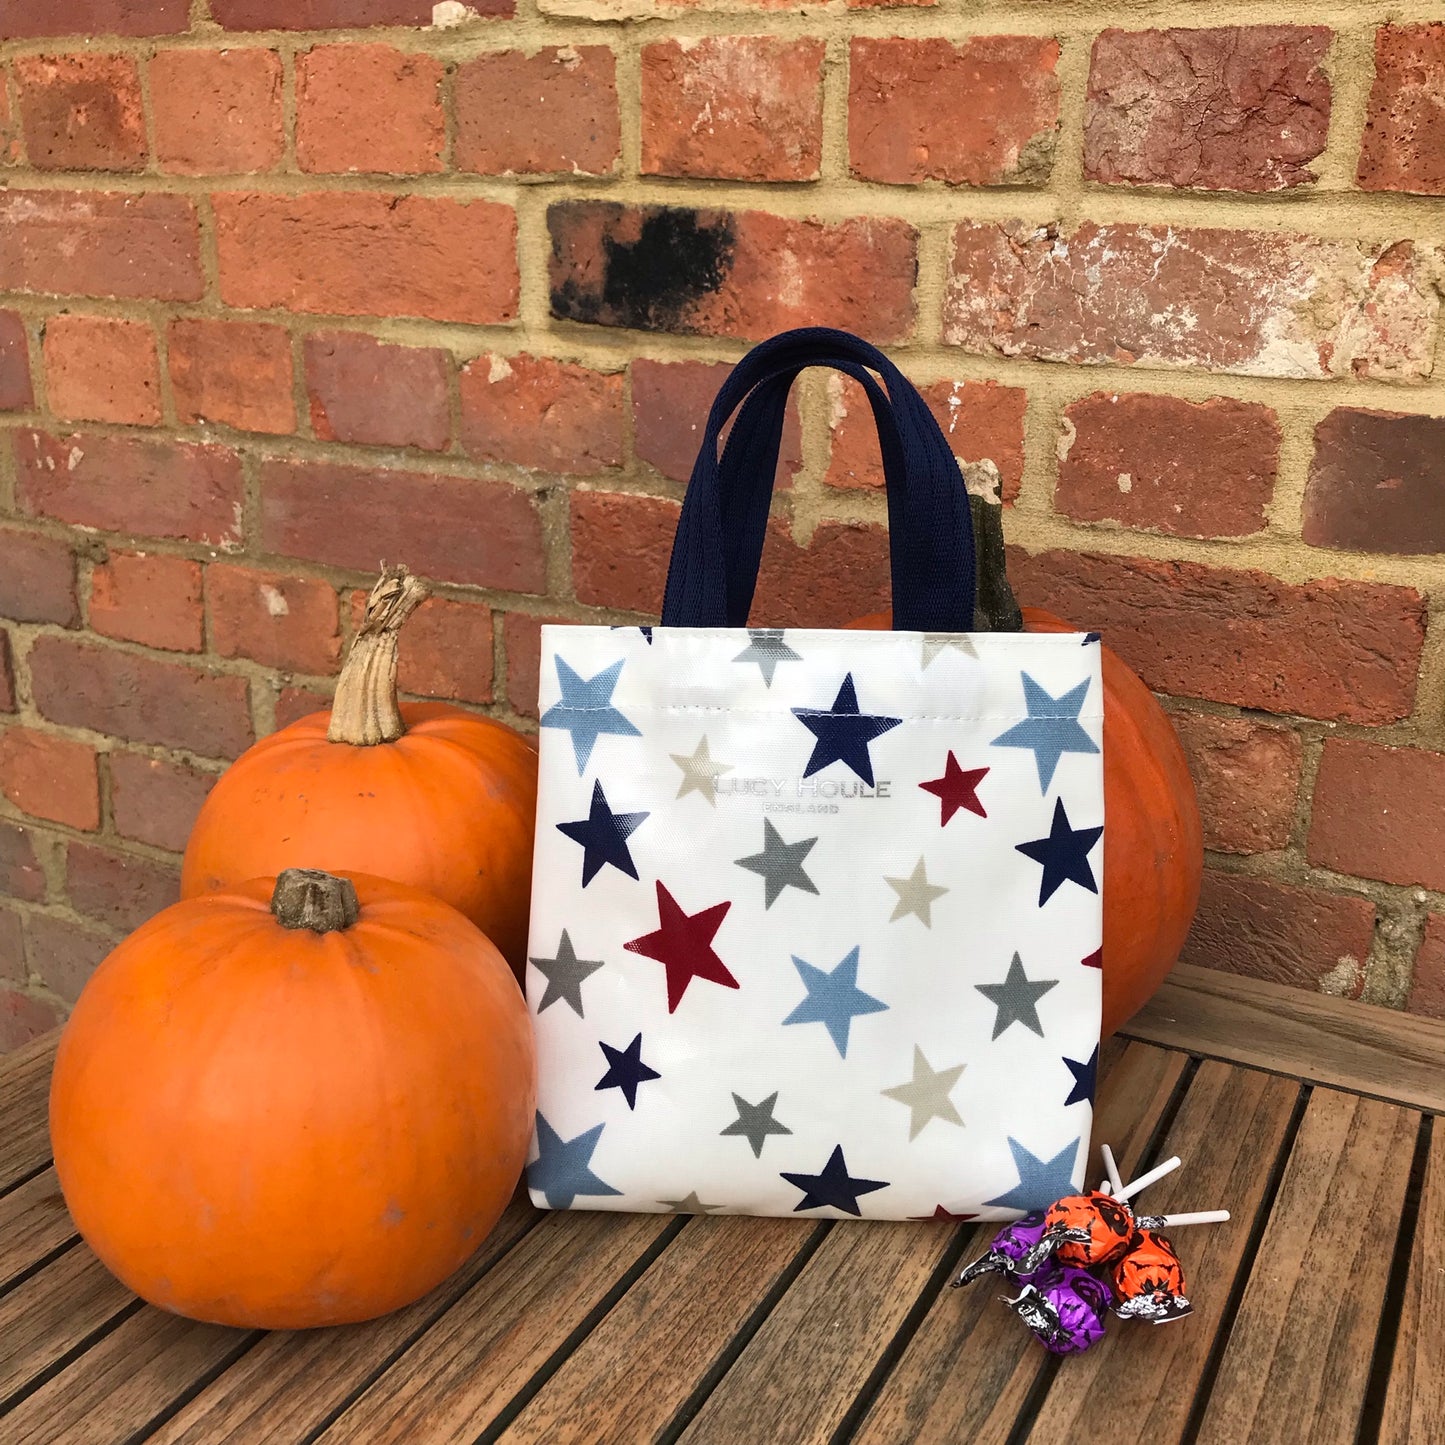 New England Star Blue Tots Tote Bag